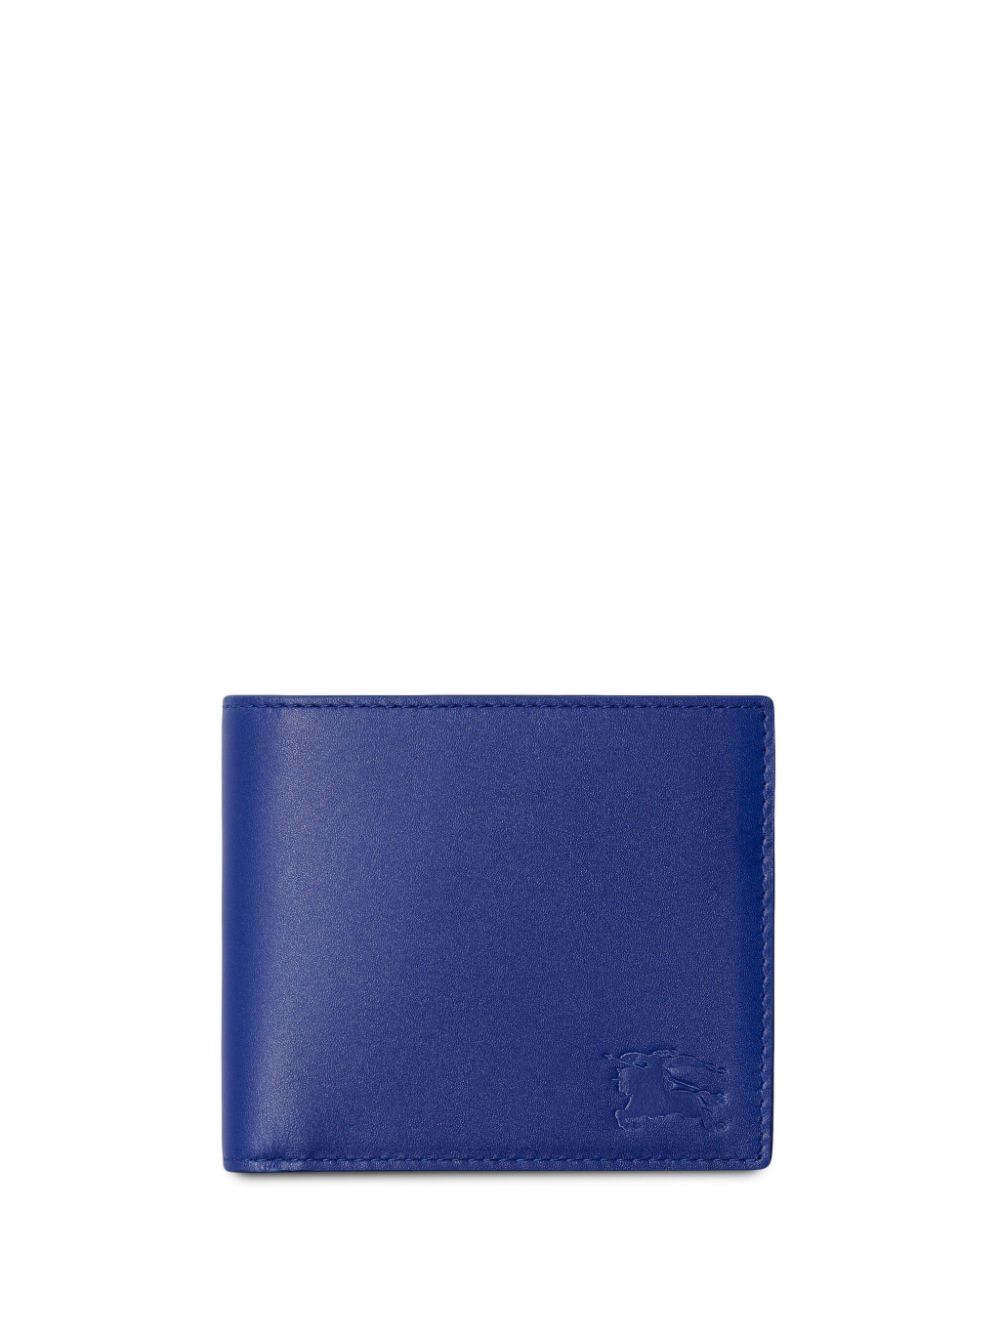 Burberry Equestrian Knight leather wallet - Blue von Burberry